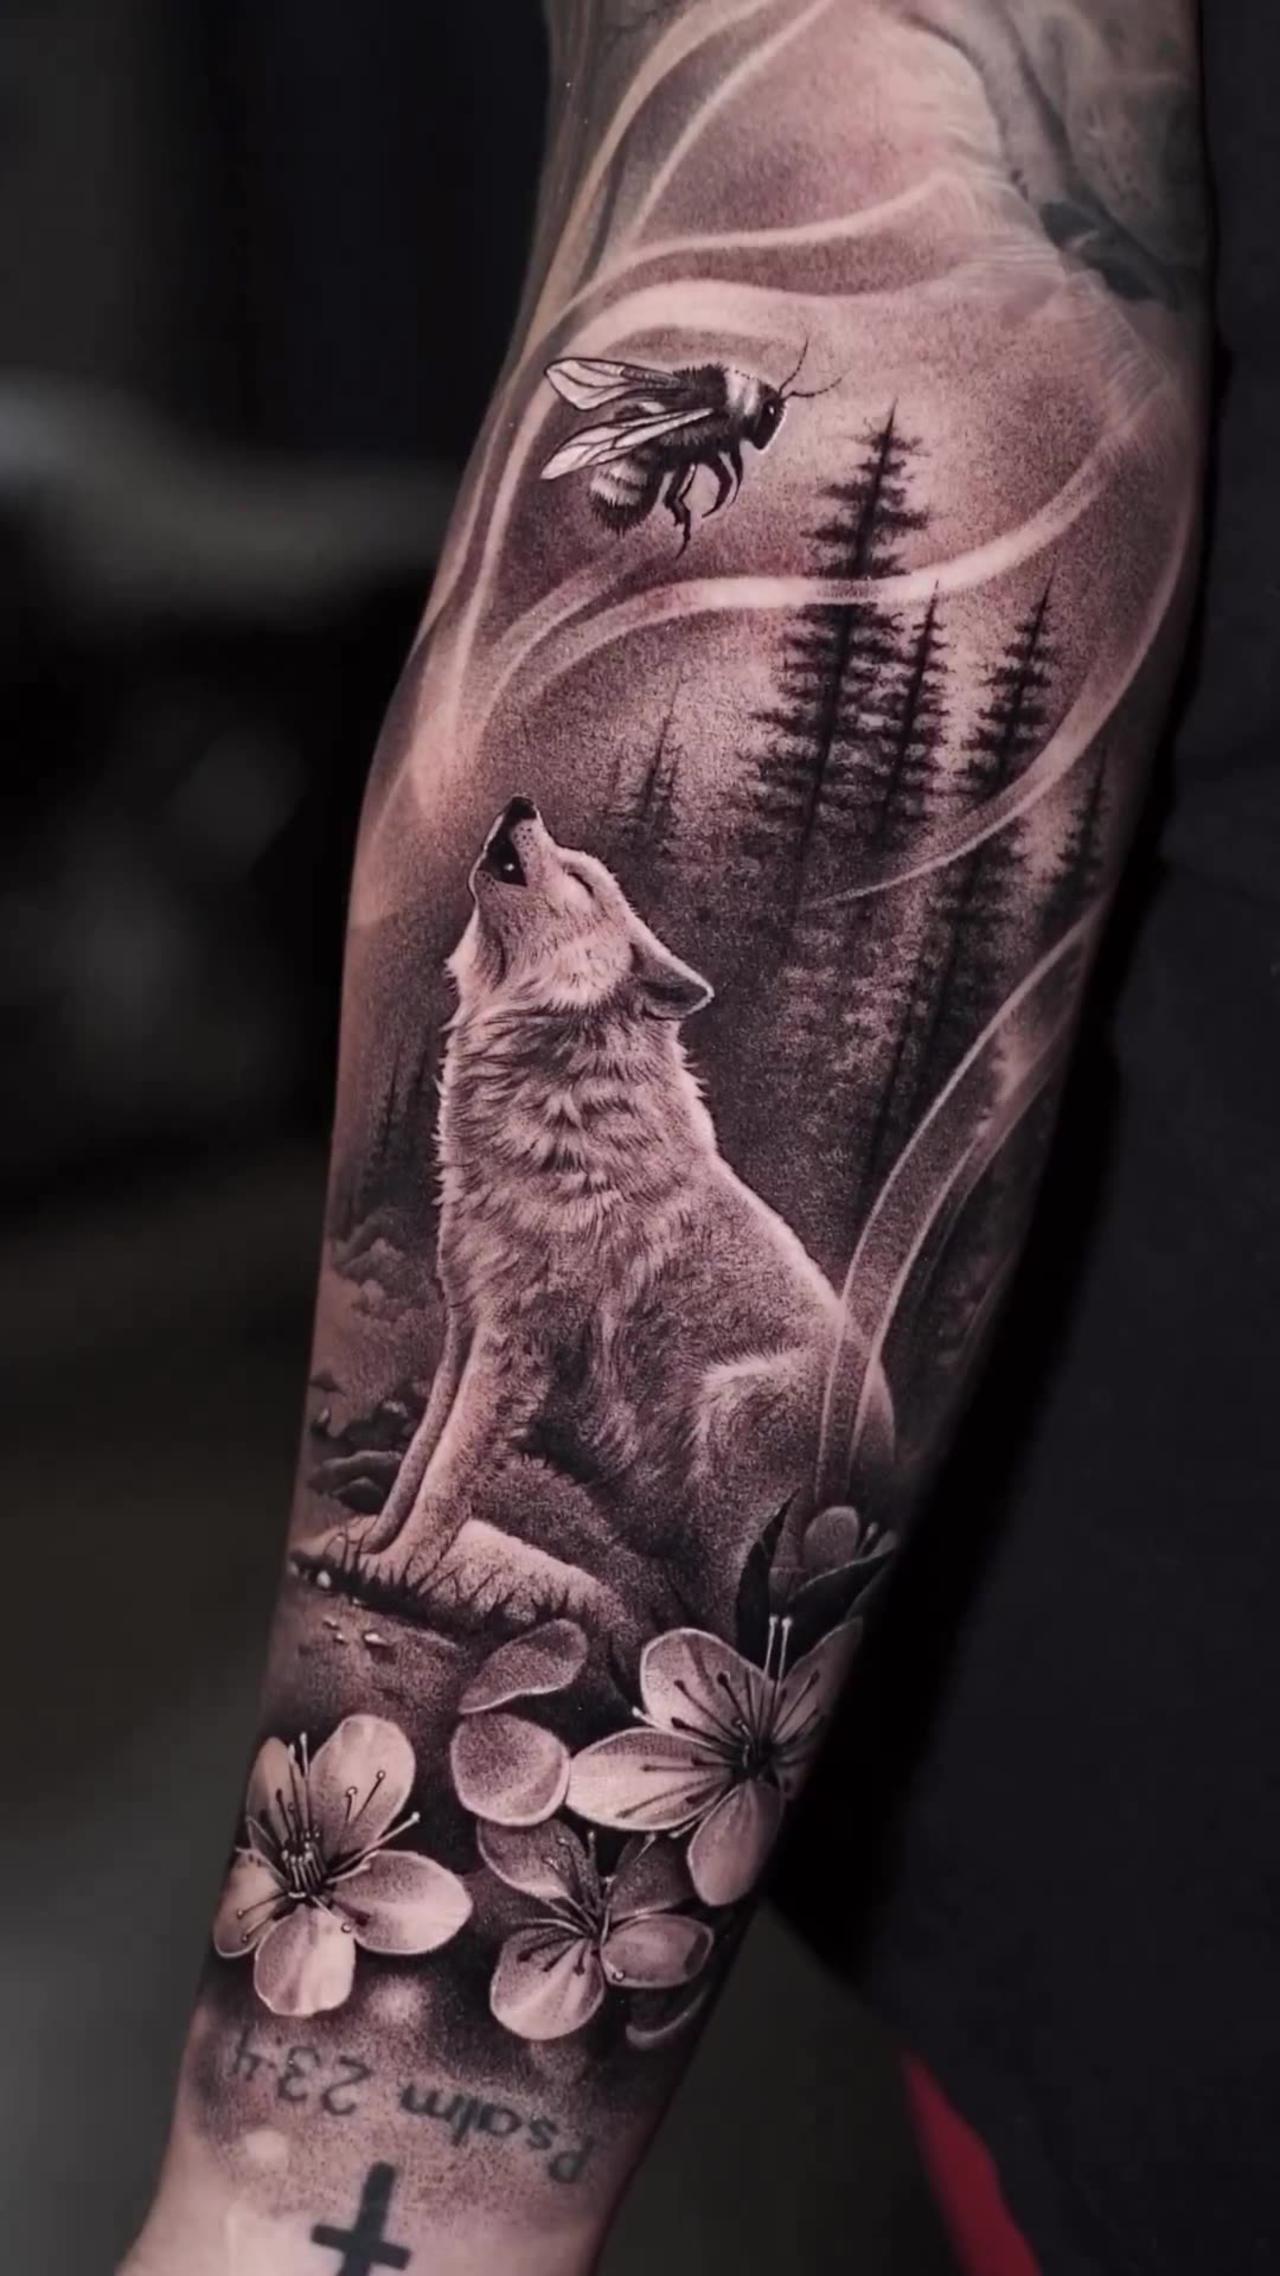 What do you think of this WOLF piece? - Jose Contreras in TEXAS!